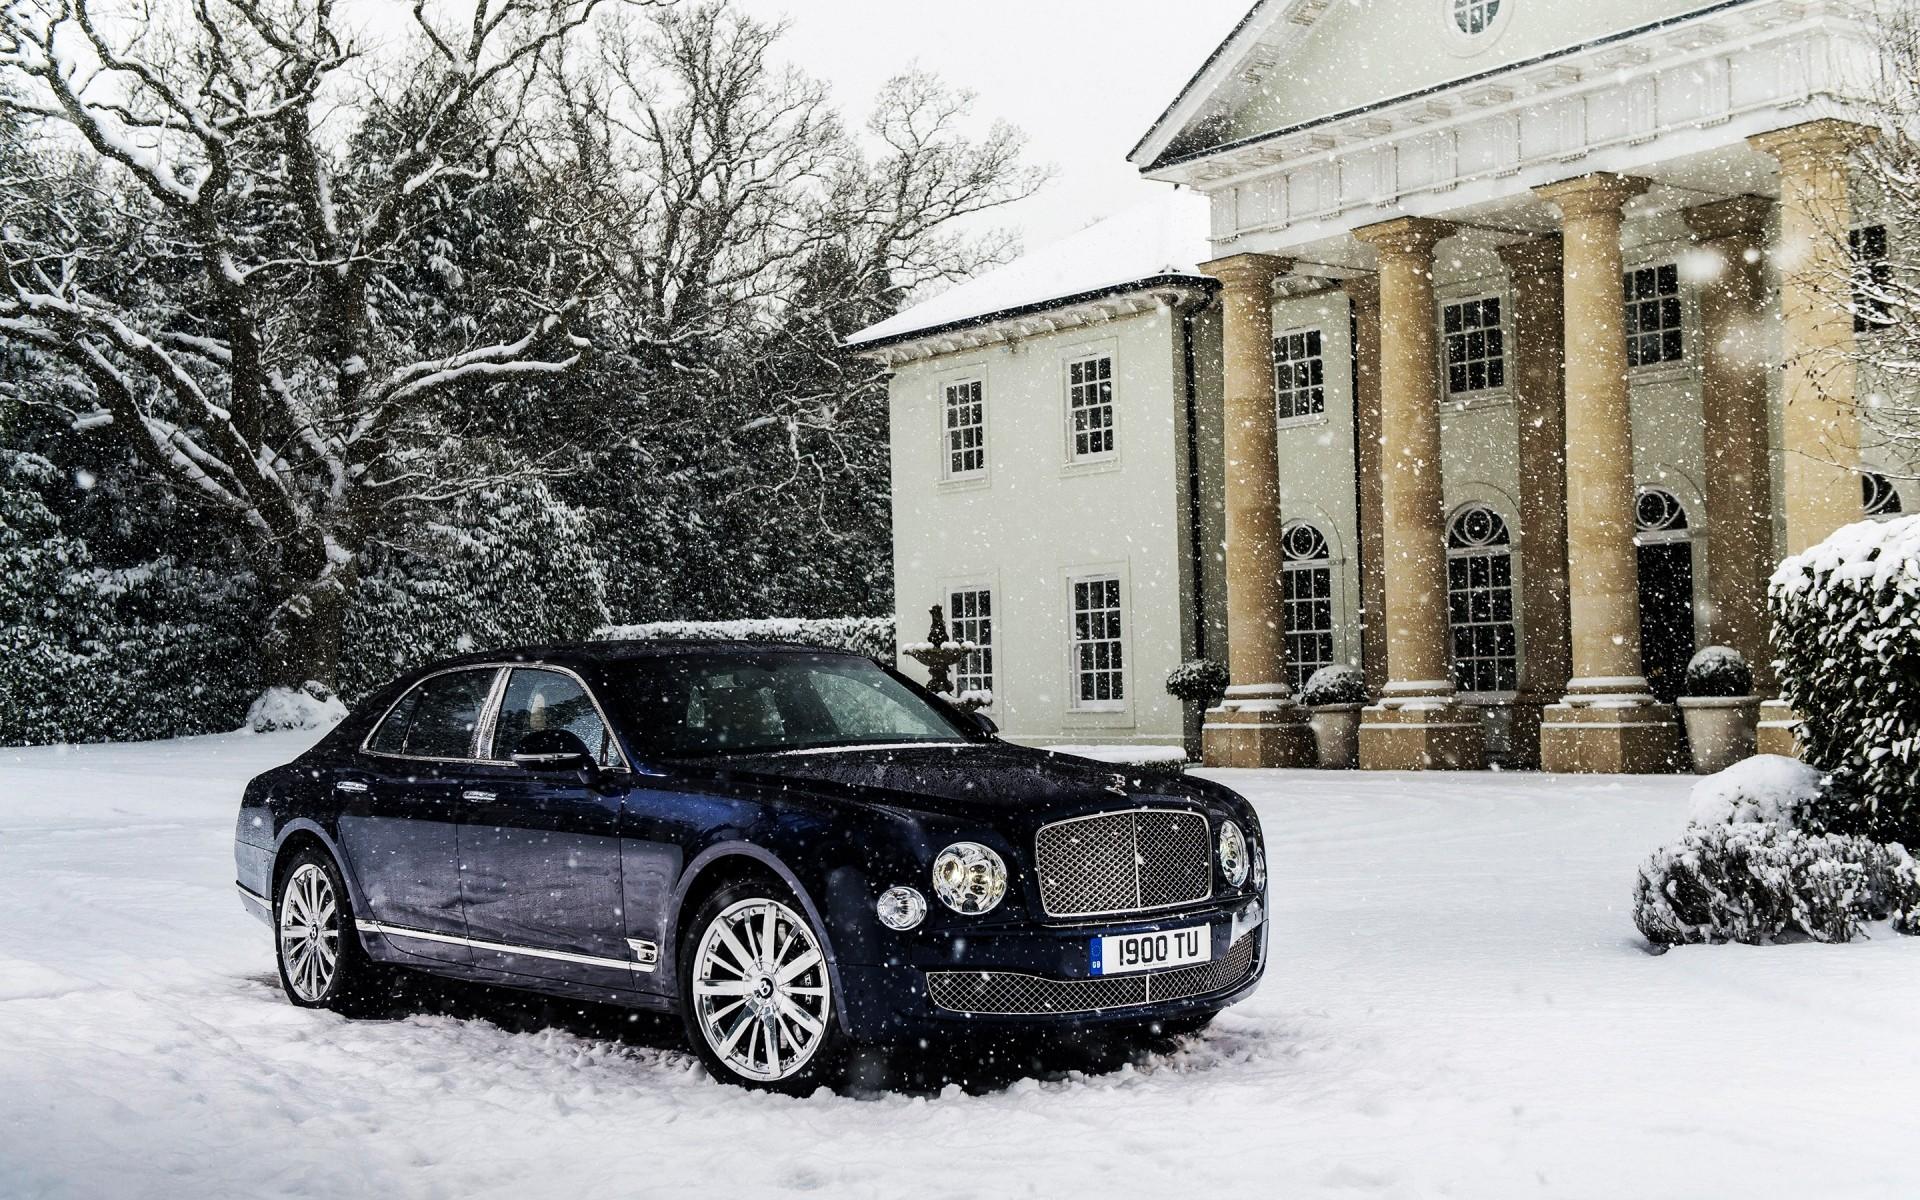 Bentley Mulsanne. Android wallpaper for free